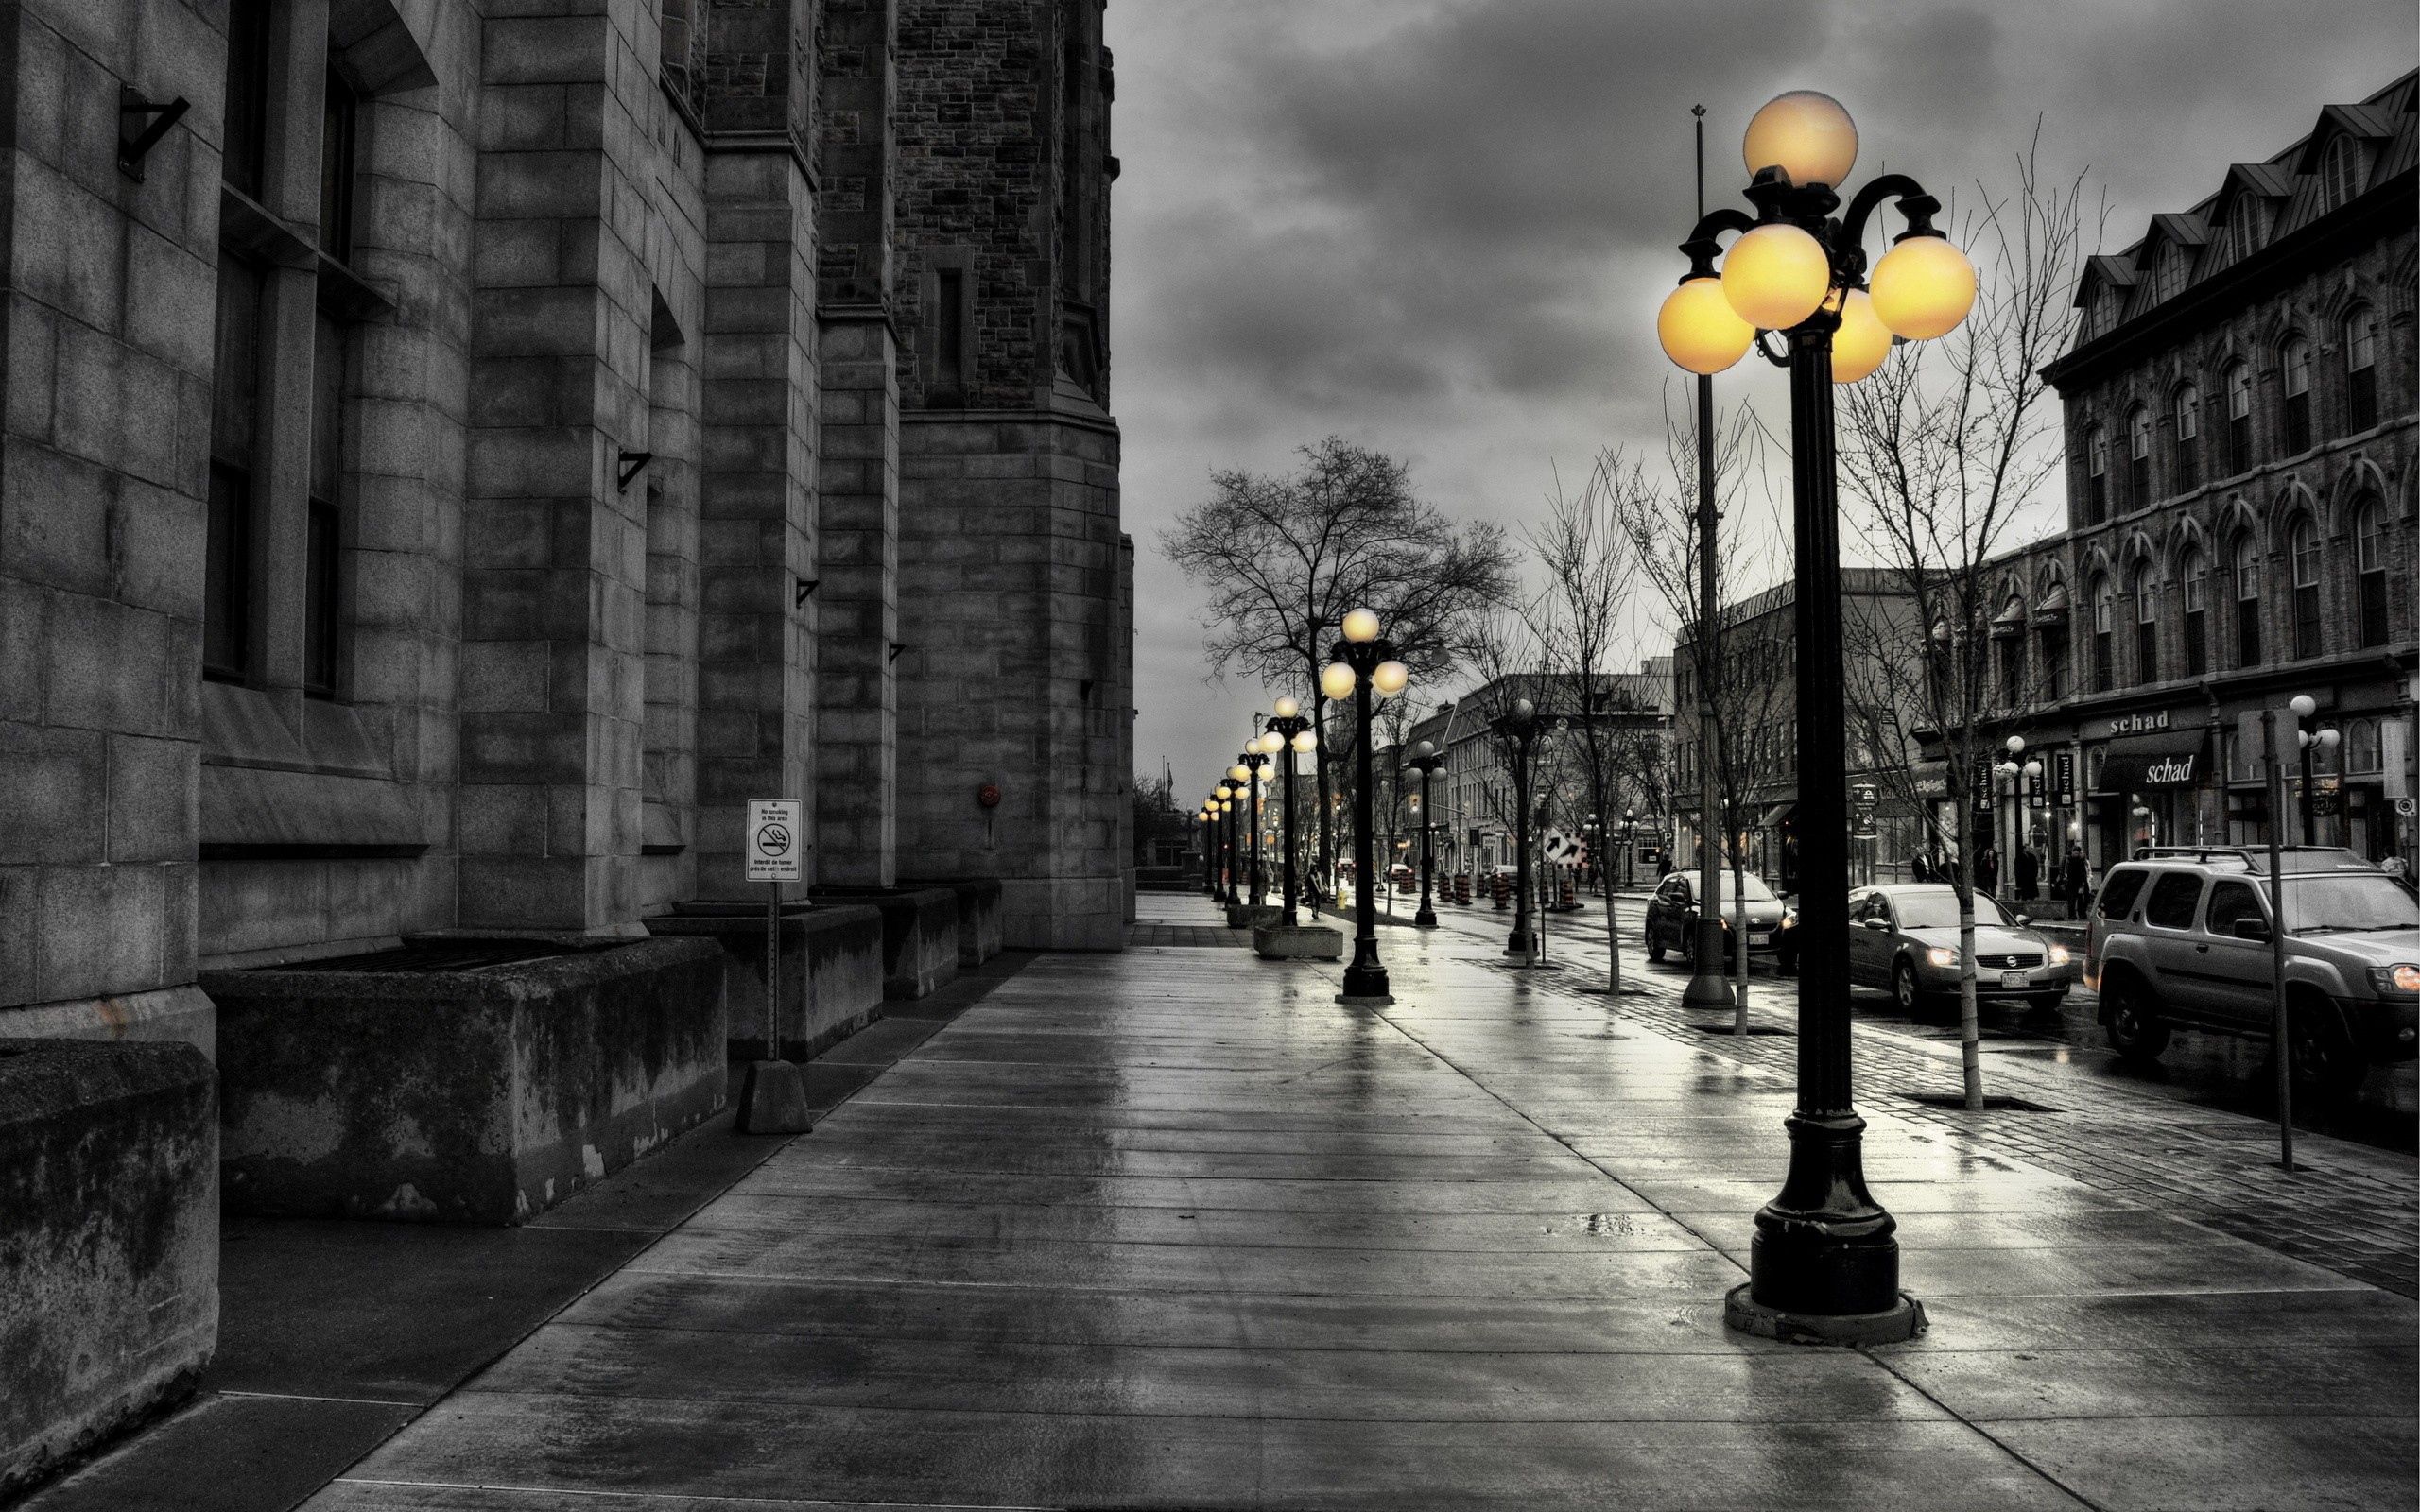 cities, city, building, lights, lanterns, evening, bw, chb, hdr, street cell phone wallpapers